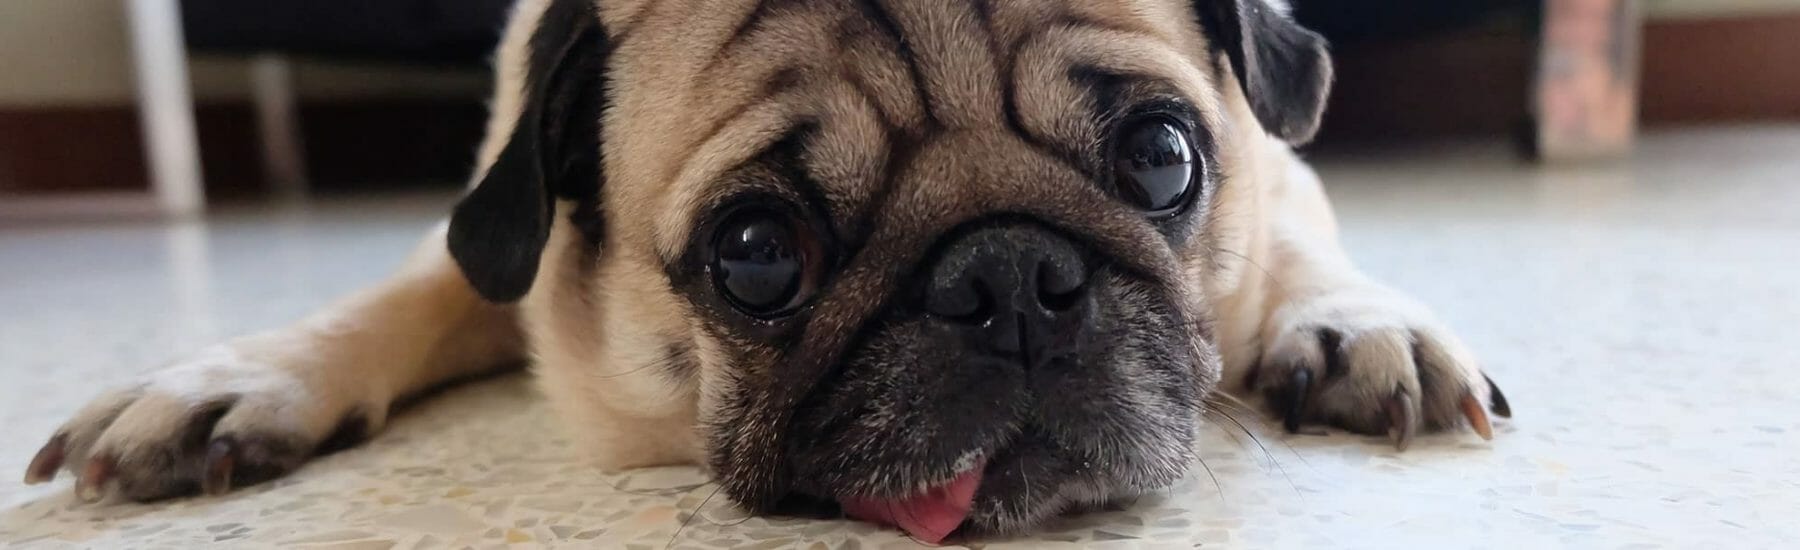 Pug lying down and sticking its tongue out